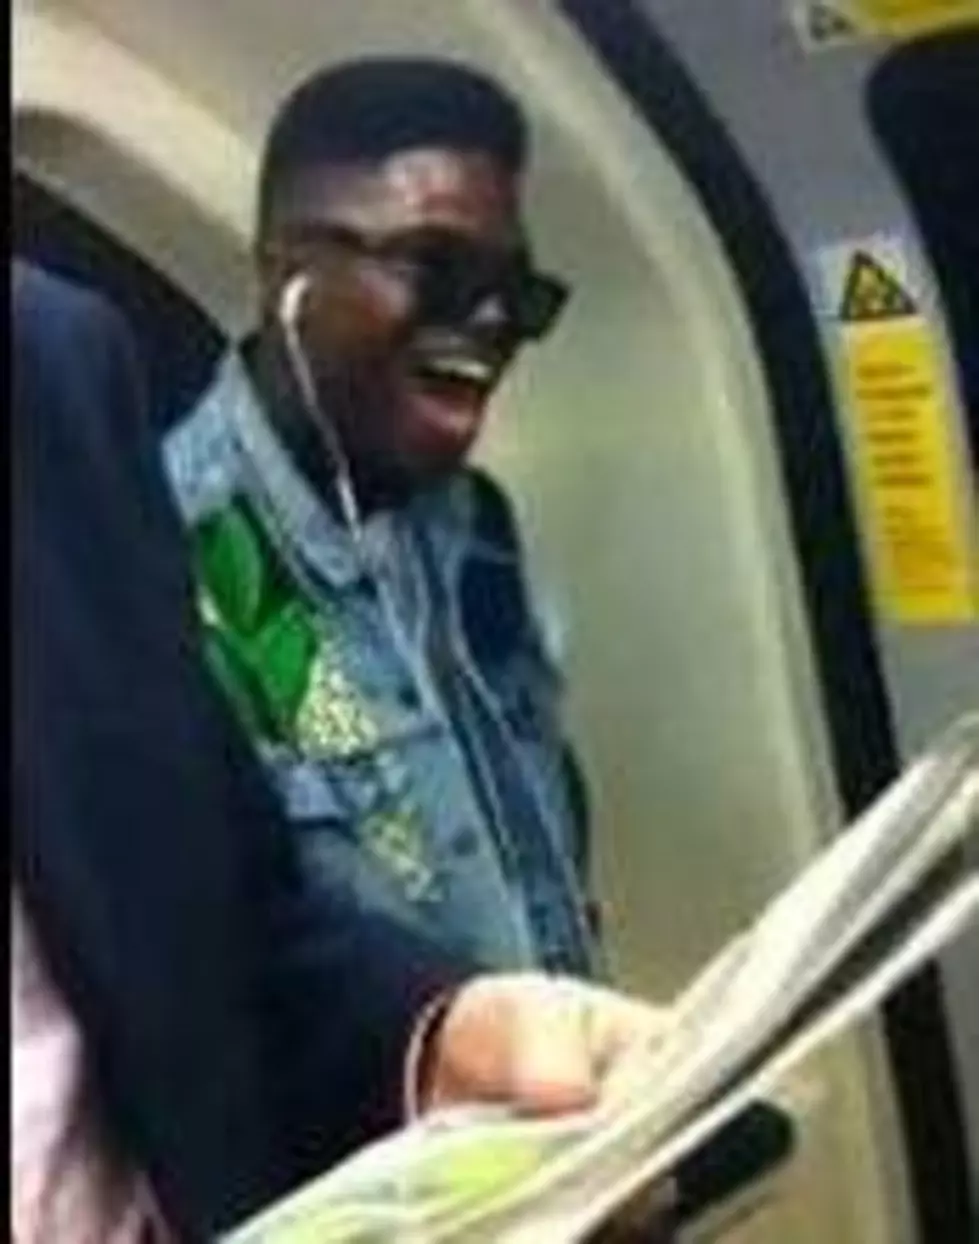 He’ll Take Care of You– Dude Belts out Rihanna on the Subway